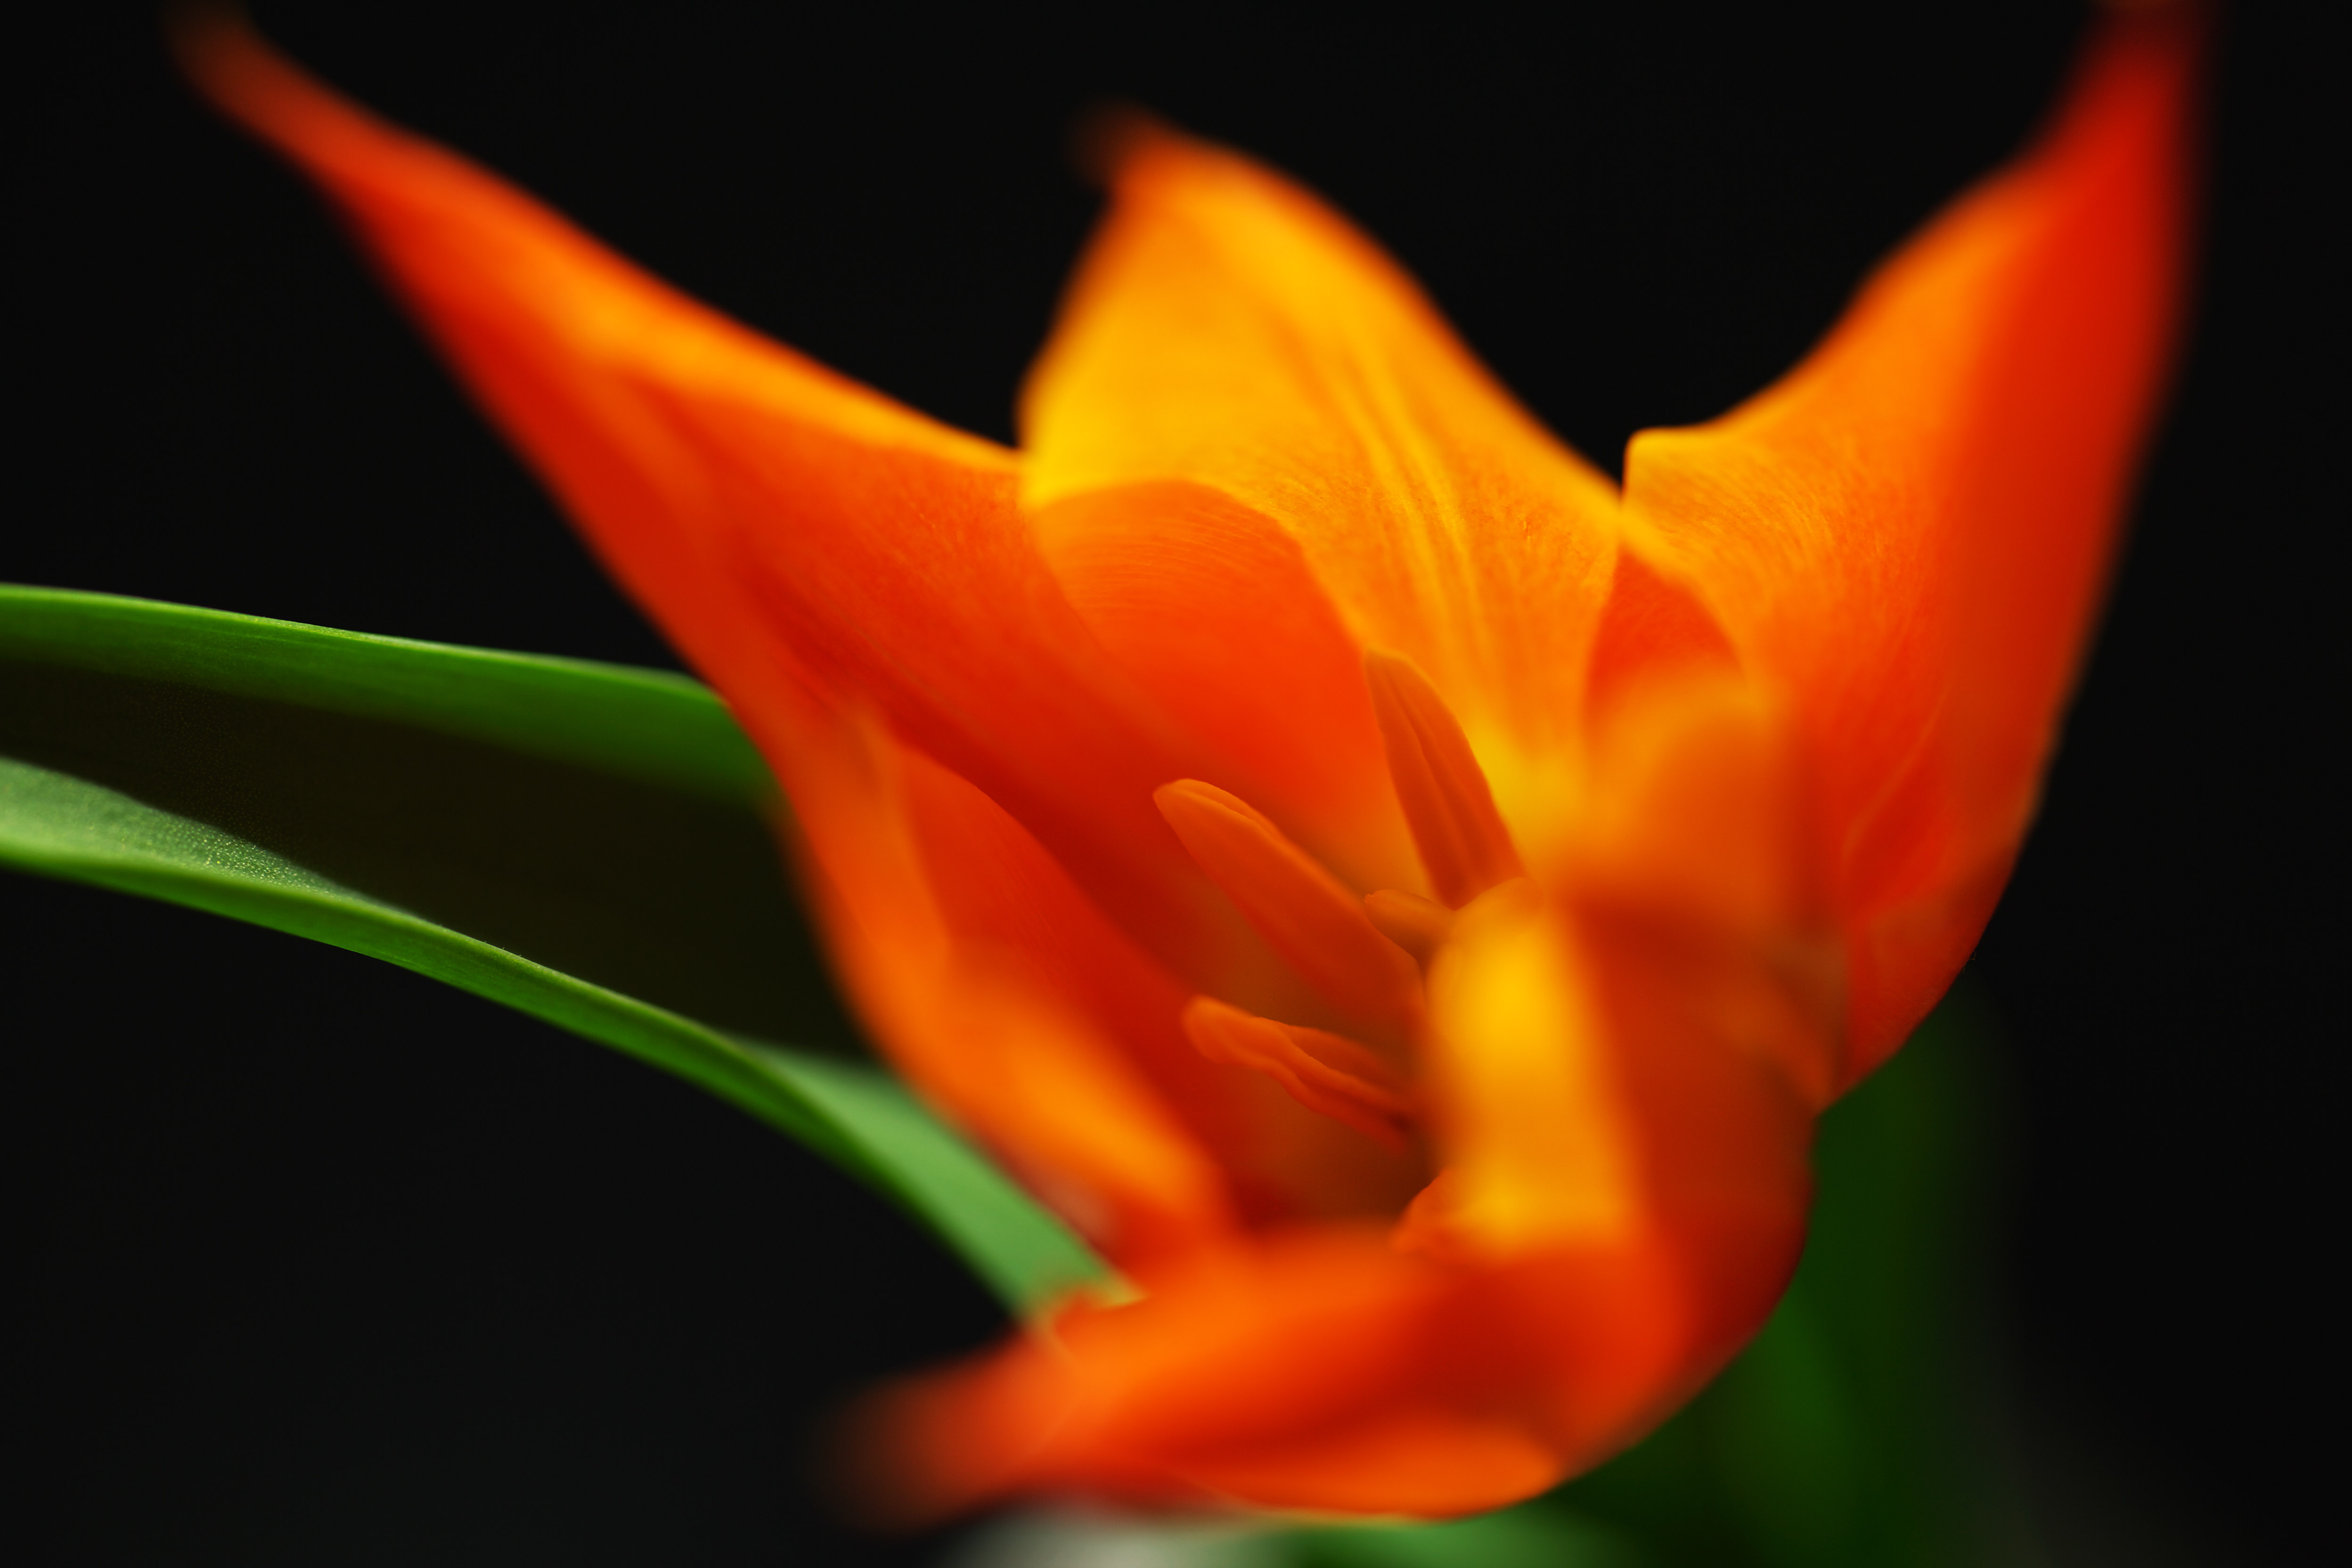 photo,material,free,landscape,picture,stock photo,Creative Commons,Heat vermilion, , tulip, petal, In spring